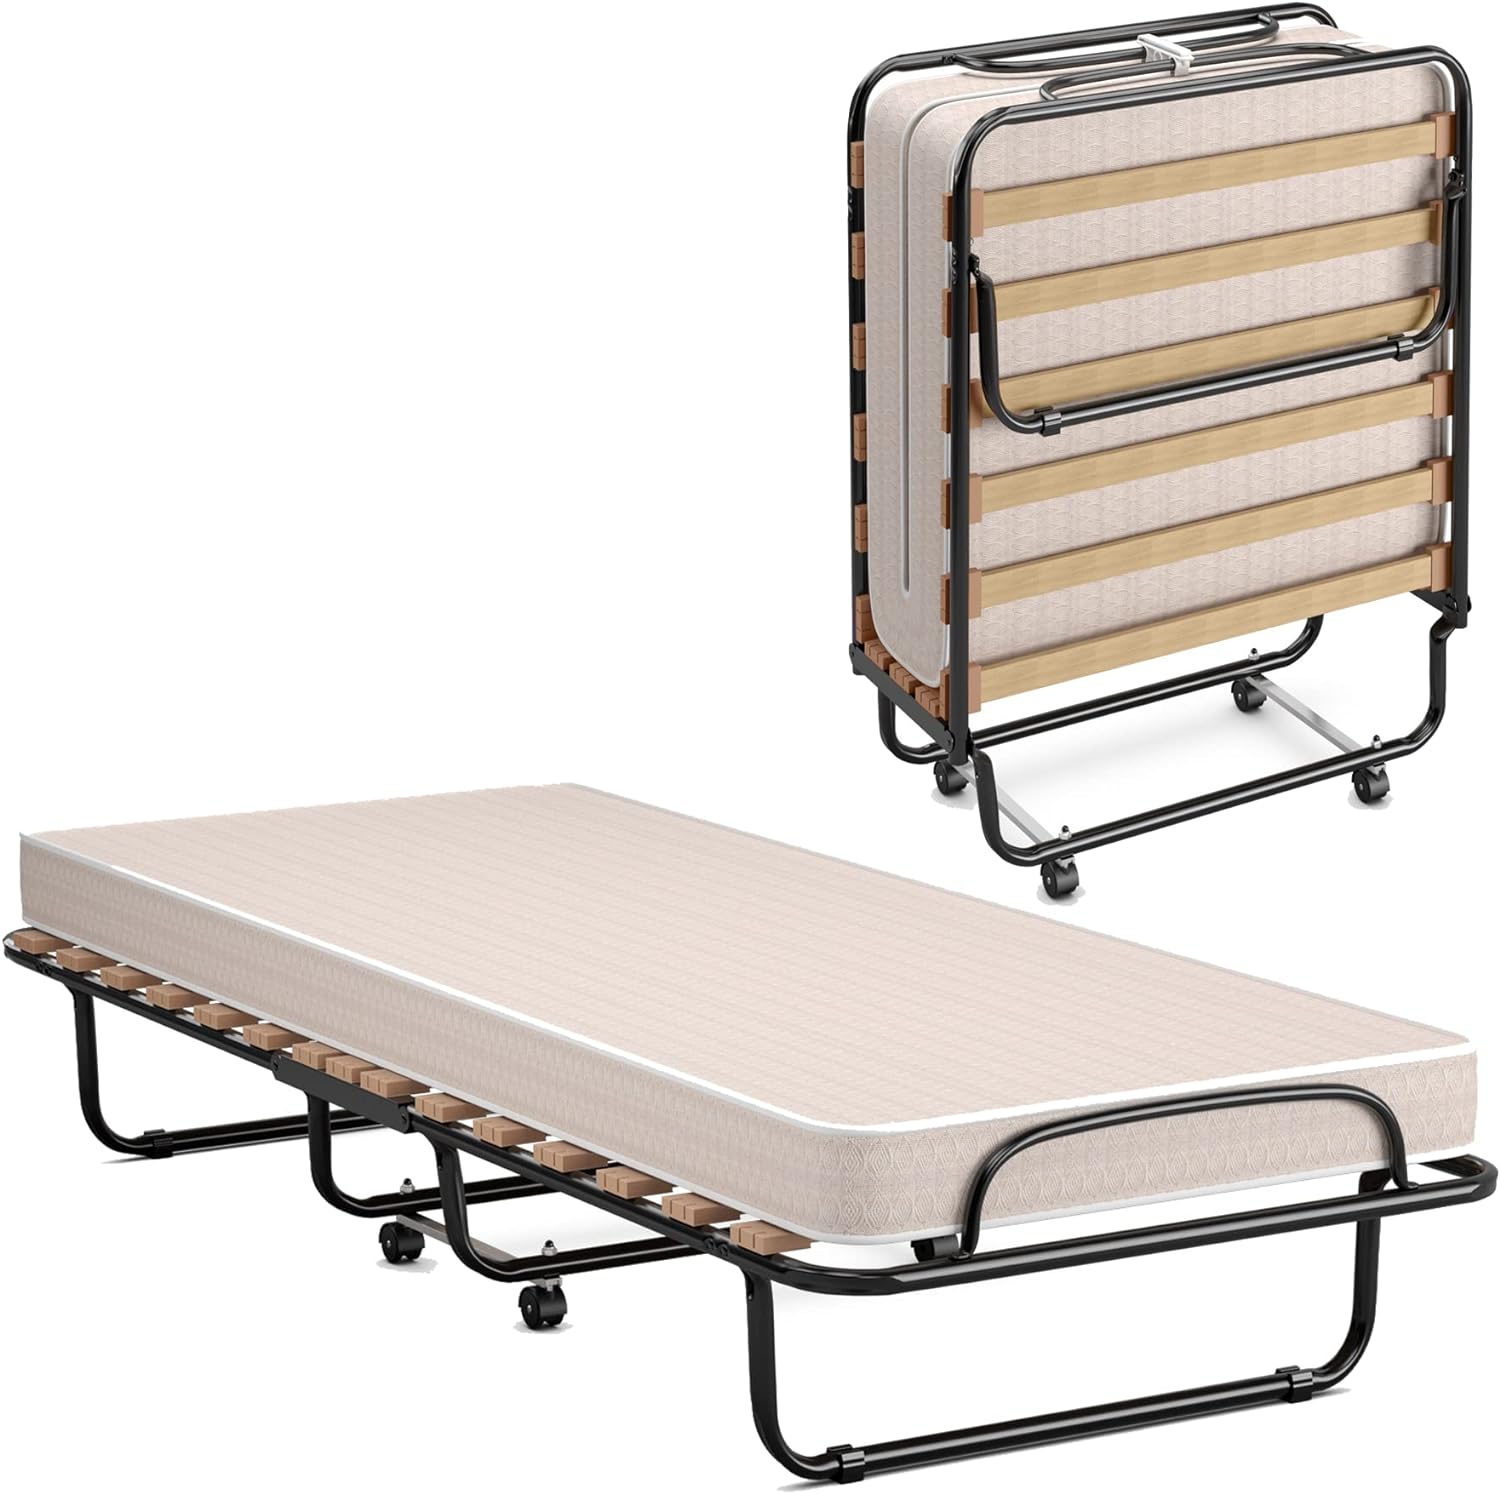 The Homieasy folding mattress is a versatile mattress to meet your every need. It is made of high-quality materials to provide you with a comfortable sleep experience. In addition, it has a folding design that saves space and is easy to carry.